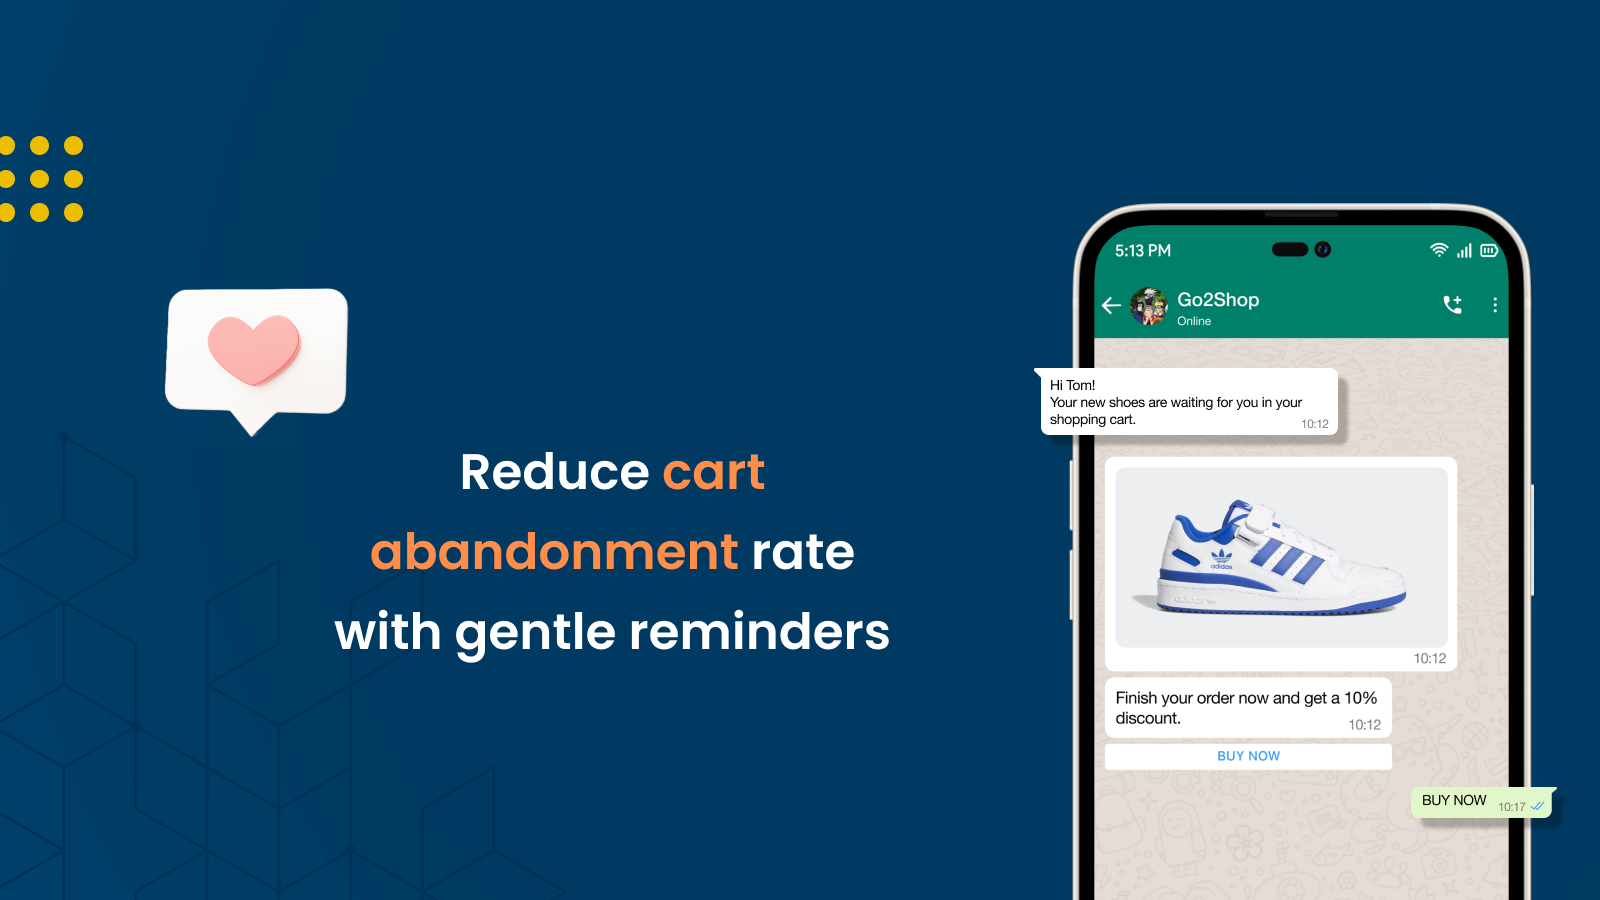 Reduce cart abandoned rate